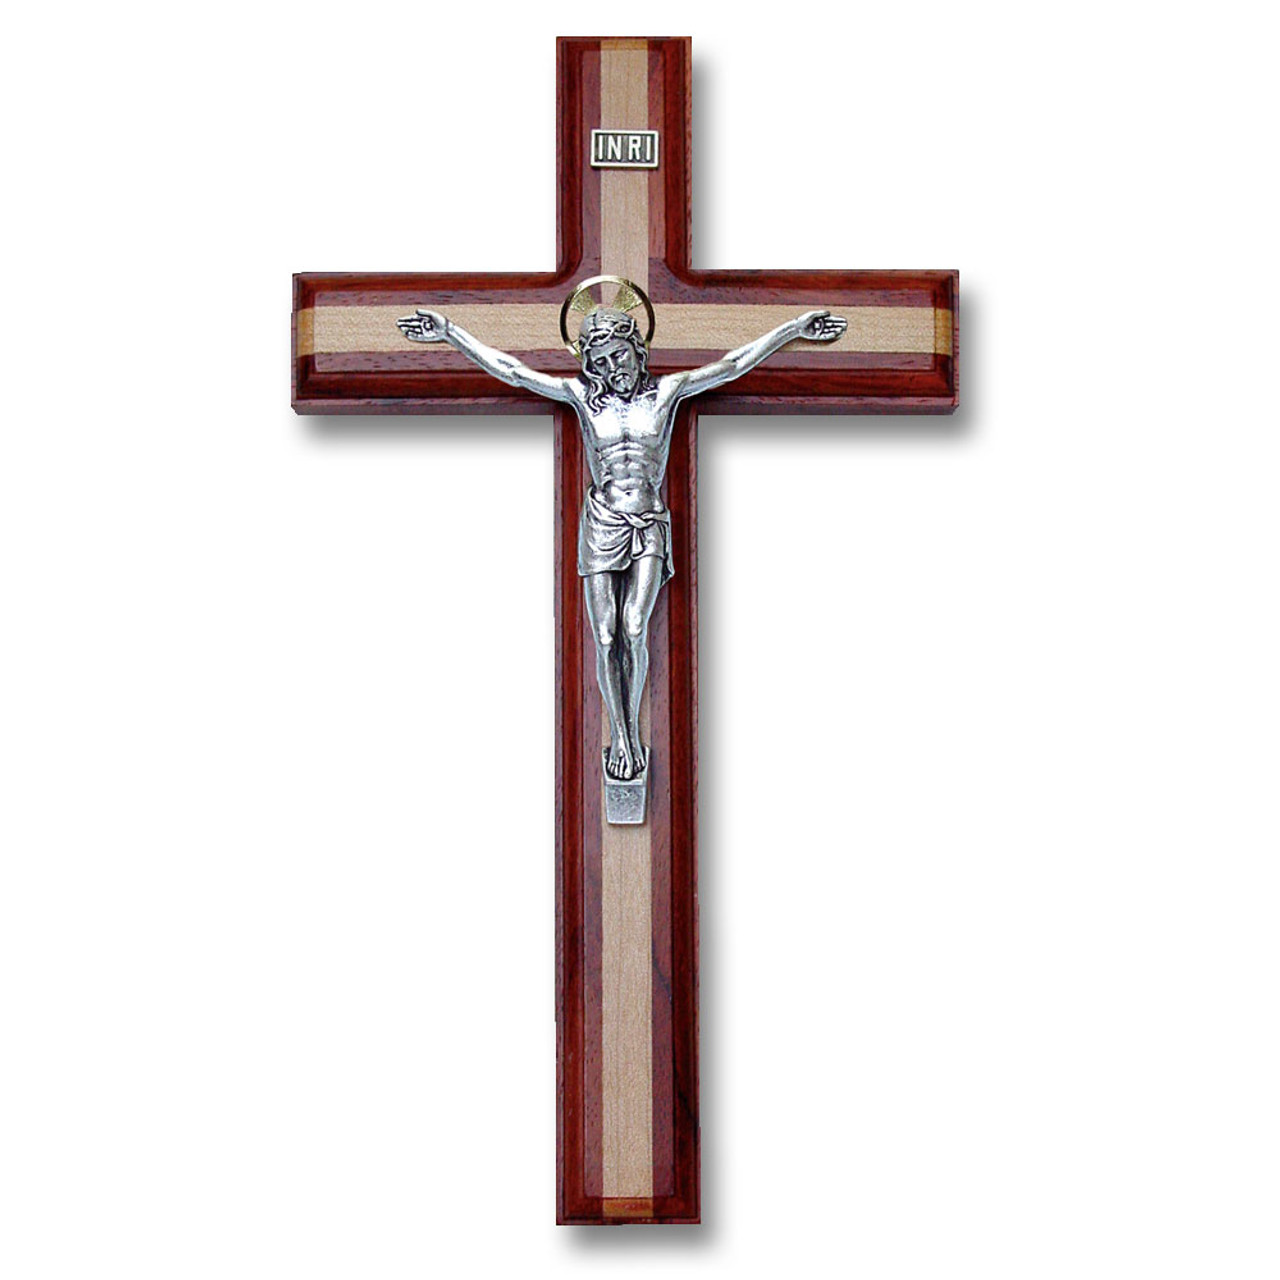 11 IN Rosewood and Maple Crucifix